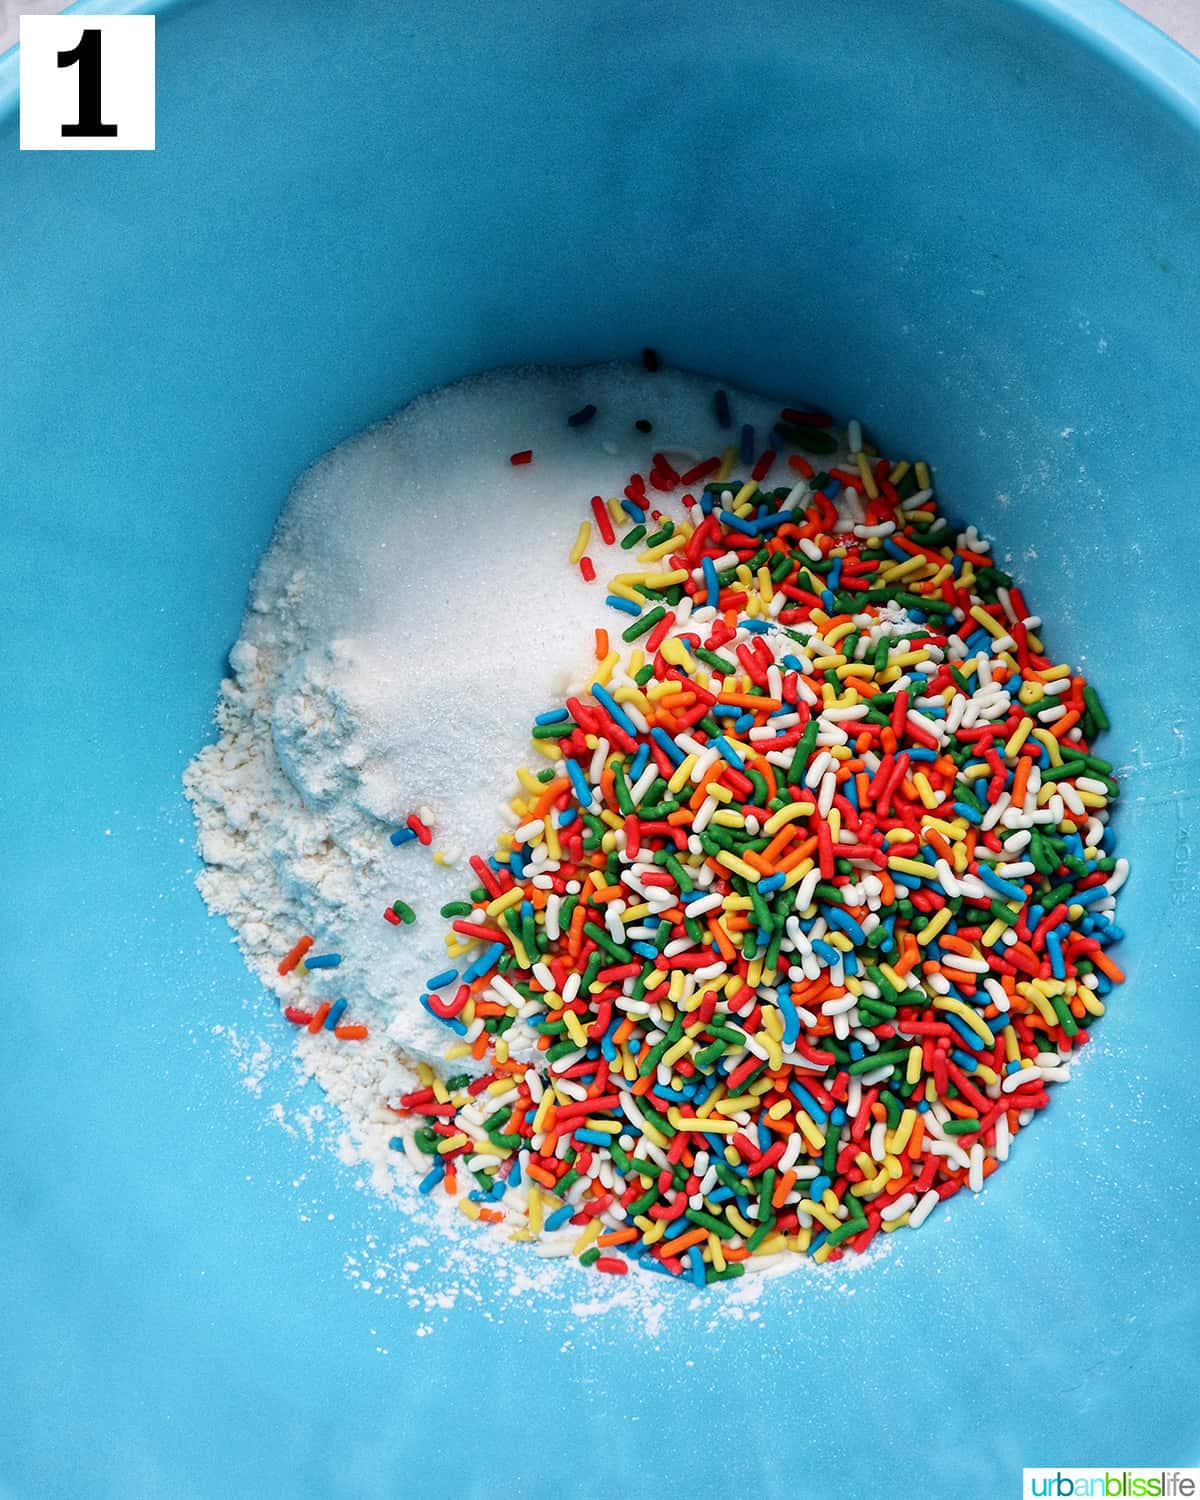 large blue bowl with colorful sprinkles and dry ingredients to make funfetti baked goods.